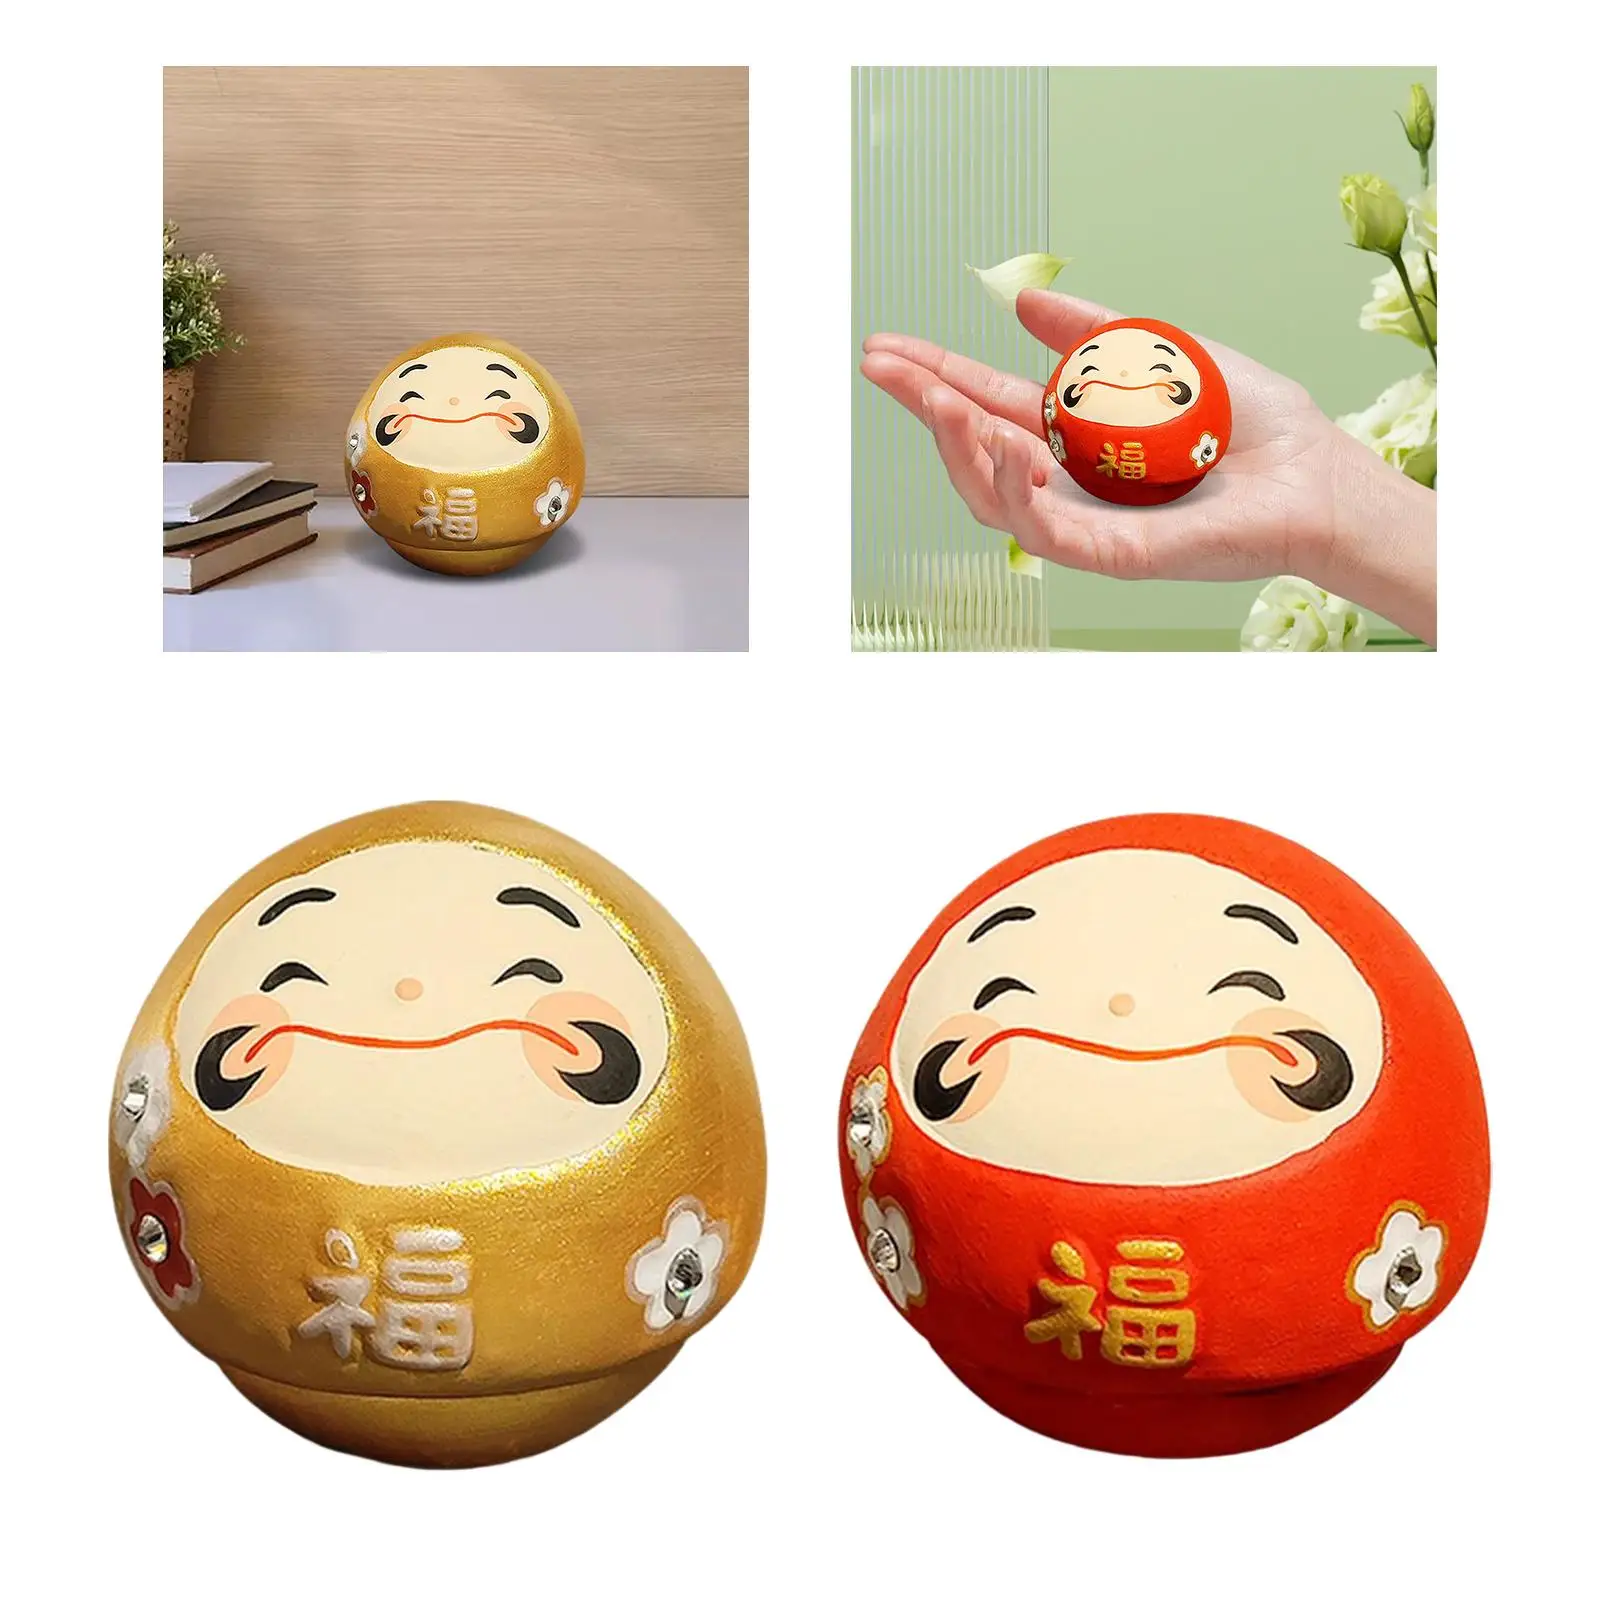 Cute Desktop Figurines Creative Tabletop Gifts Hand Painted Sculpture Decoration for Living Room Cabinet Home Office